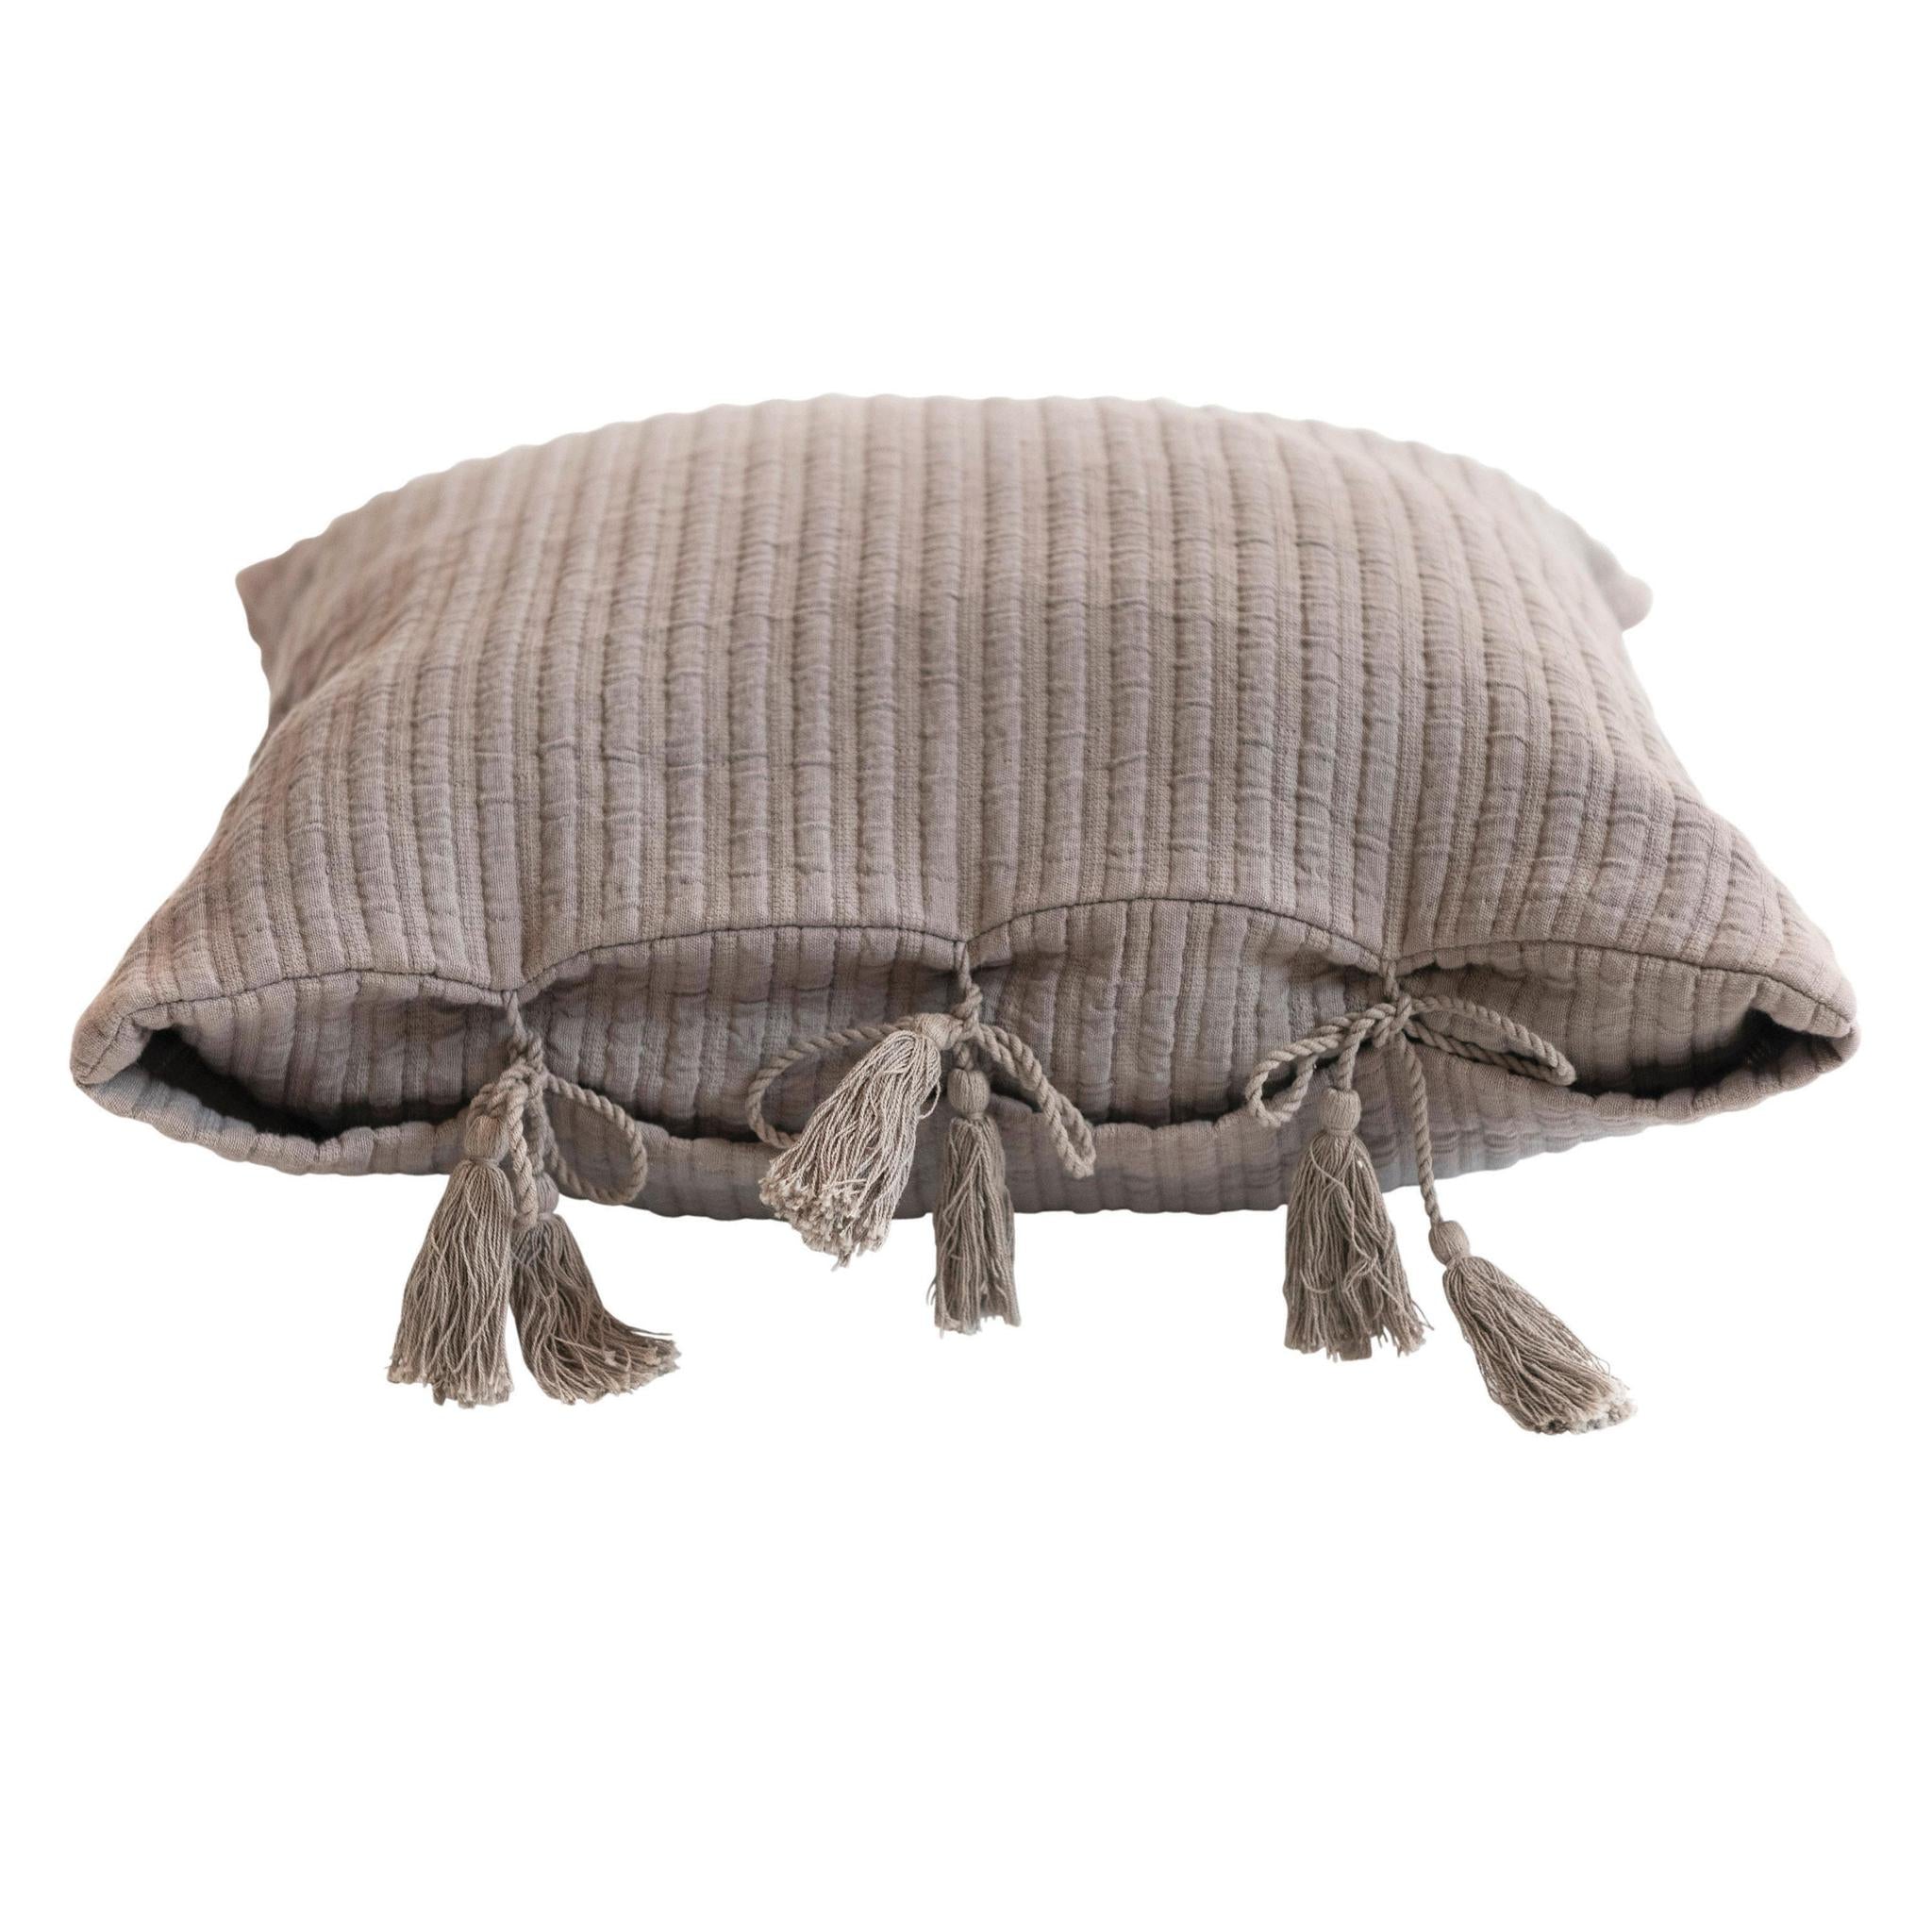 Square Woven Cotton Pillow w/ Tassel Ties